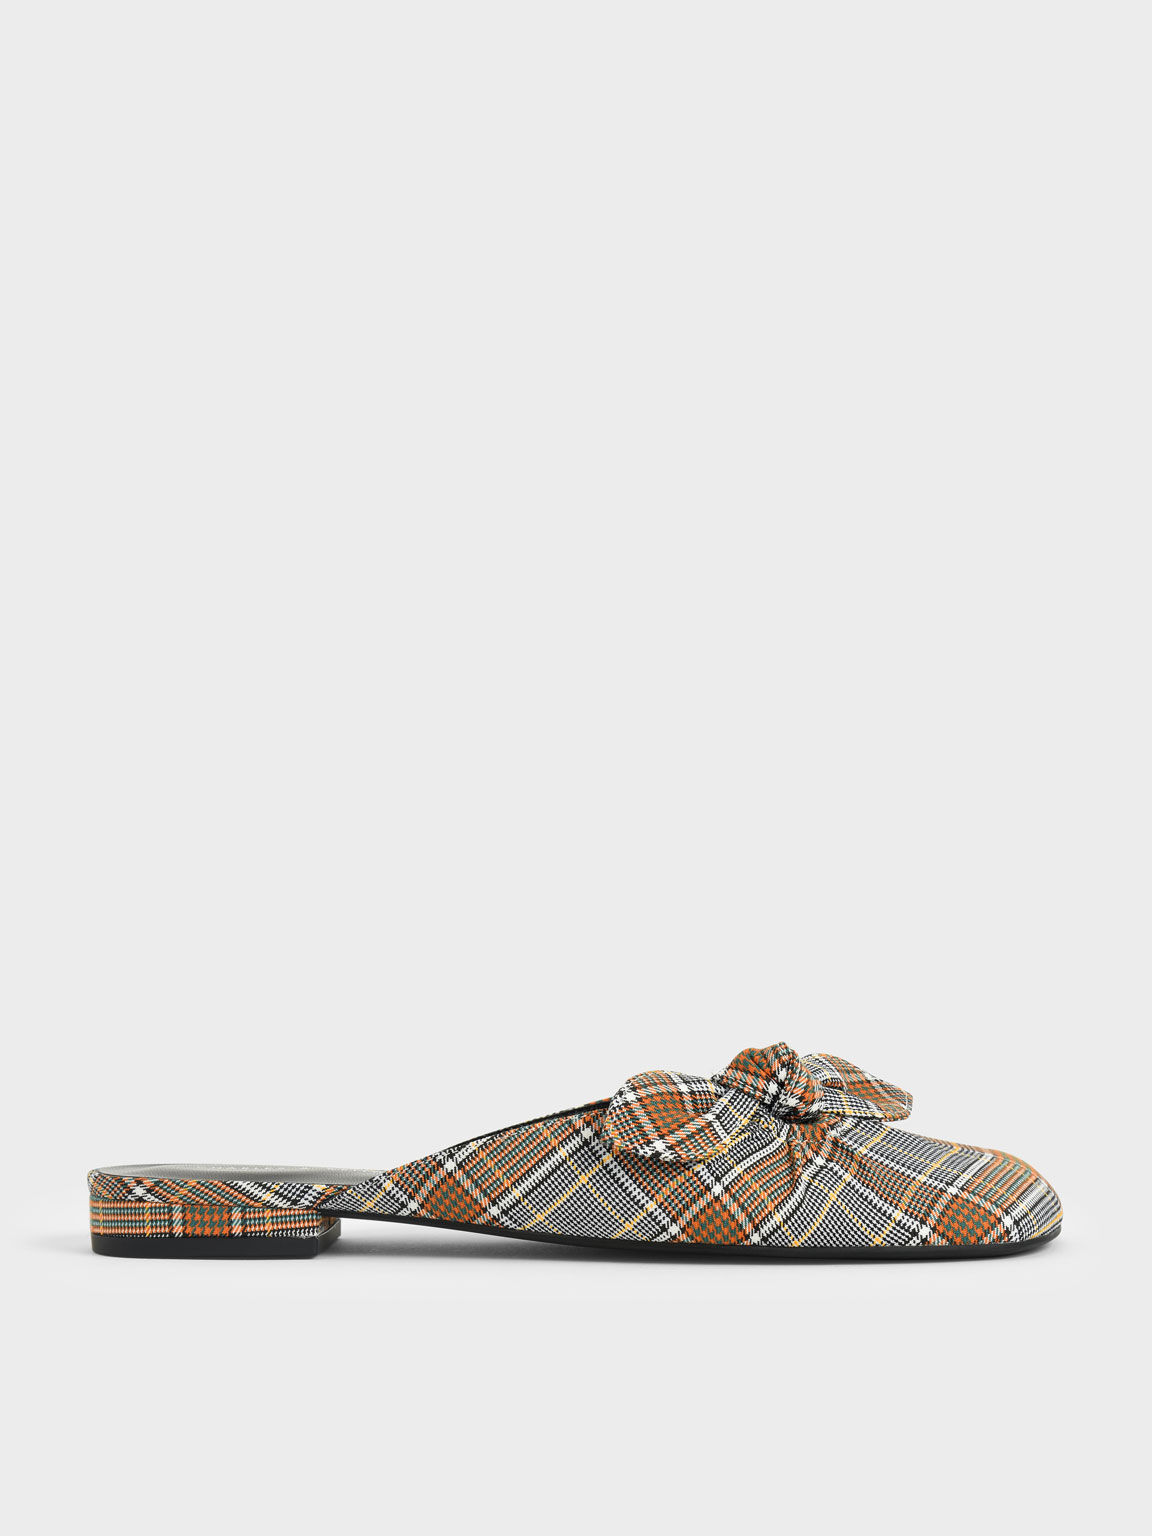 Sandal Check Print Knotted Fabric Mules, Grey, hi-res